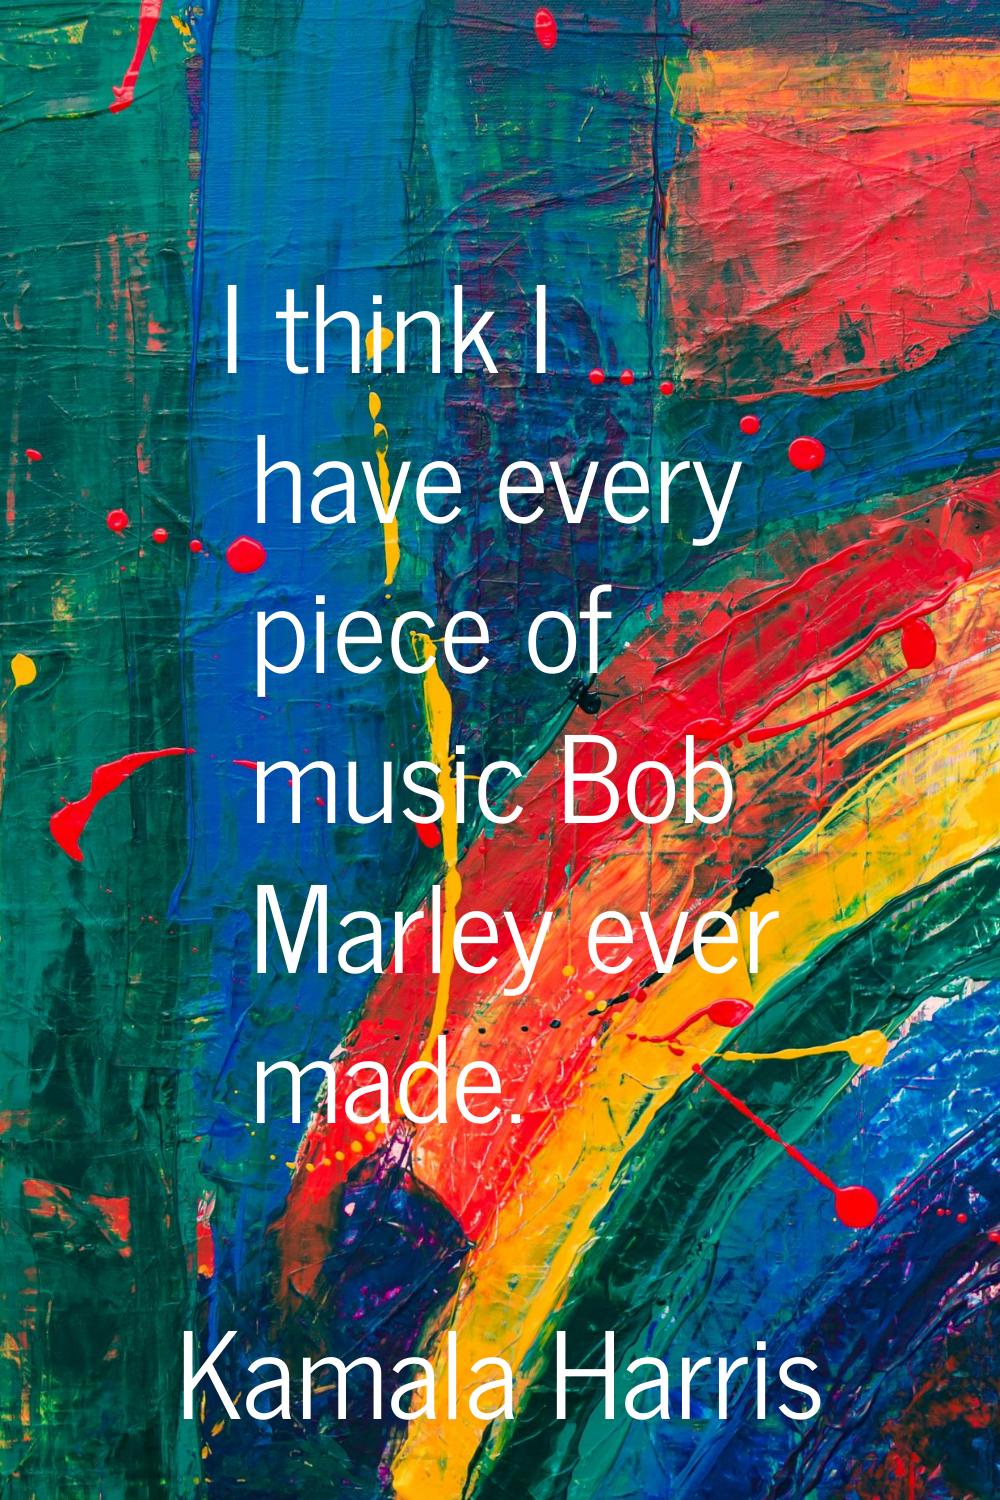 I think I have every piece of music Bob Marley ever made.